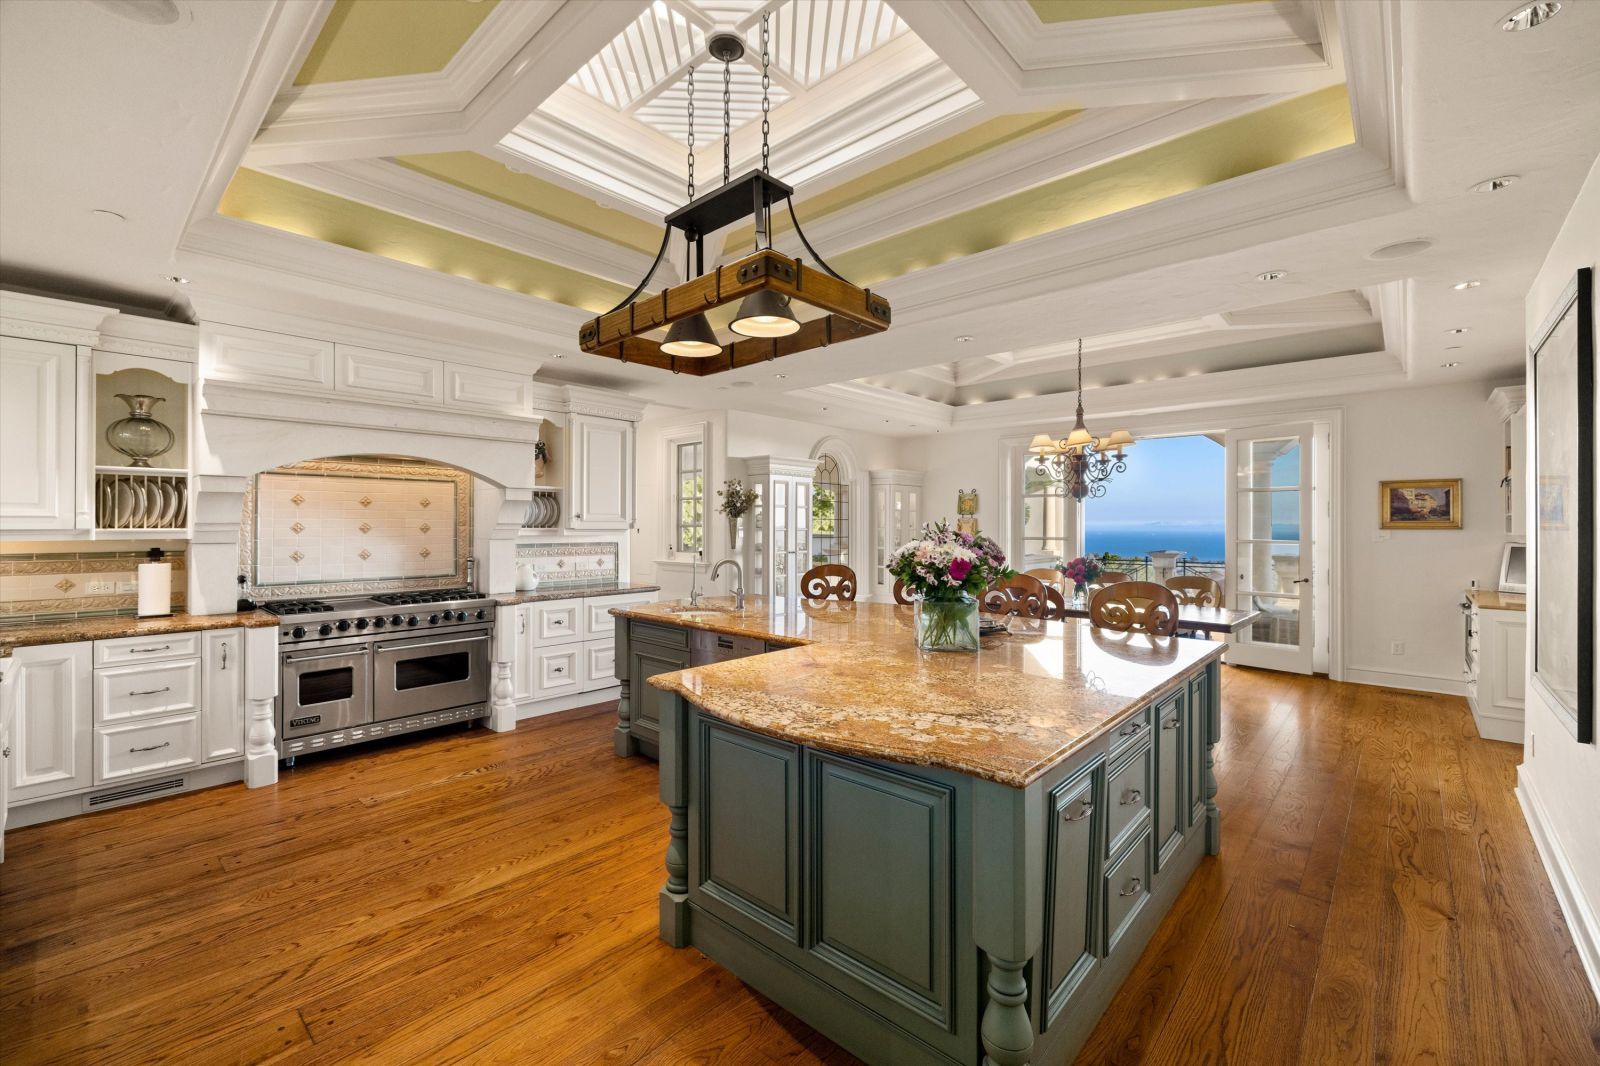 The luxury kitchen of a Santa Barbara home with a large center island, high-end stainless appliances, a large skylight, and a large window with ocean views.ocean views